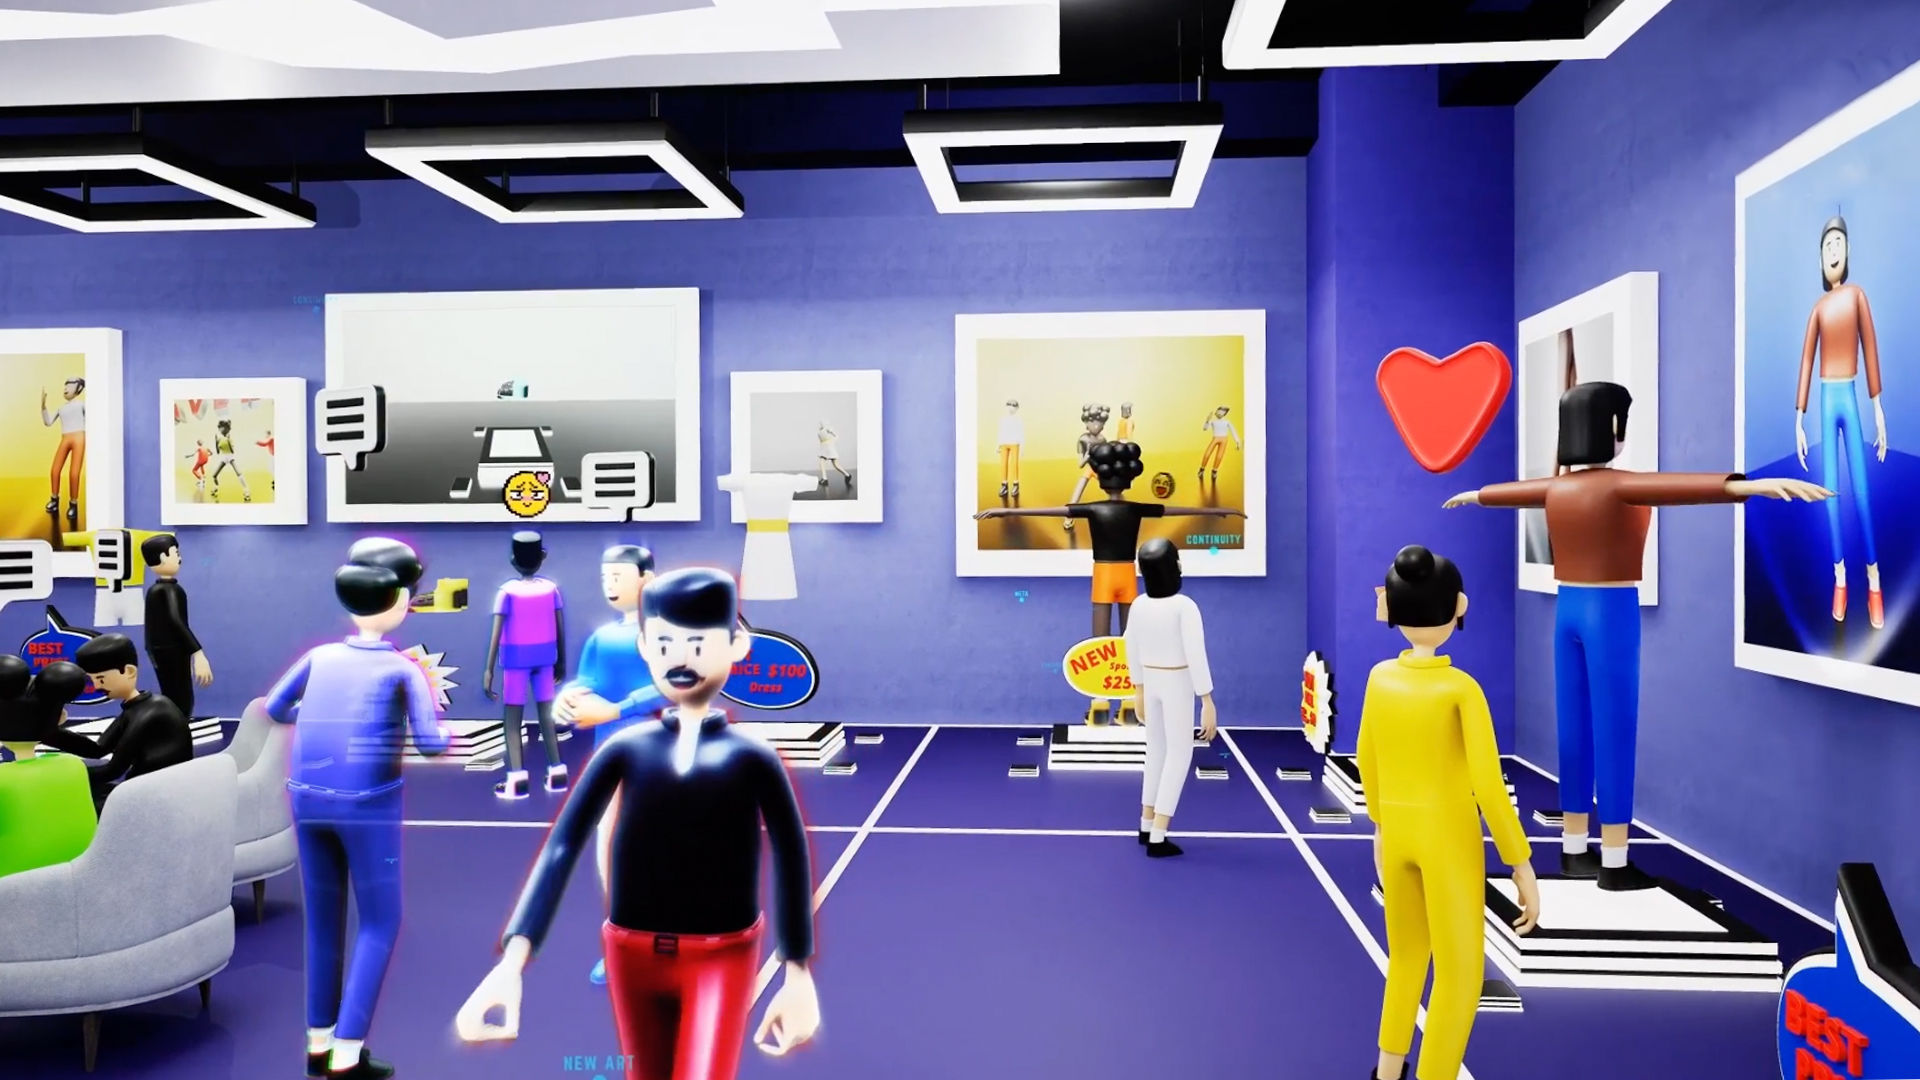 VRChat's Avatar Dynamics System Aims To Upgrade Interactions